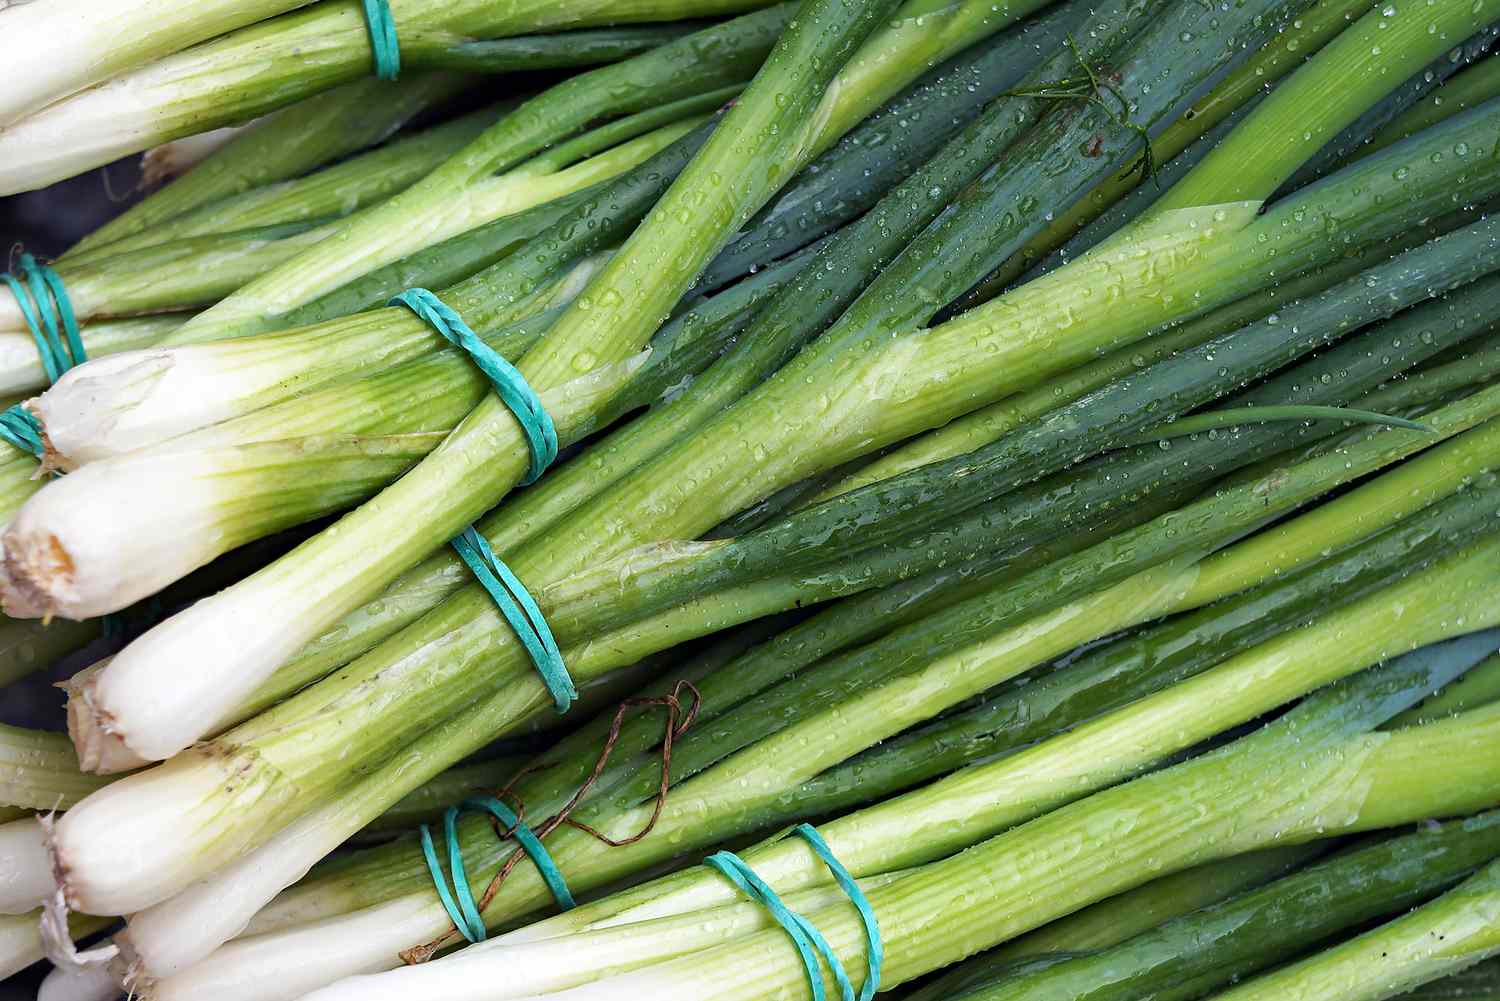 How To Store Green Onions To Last Longer